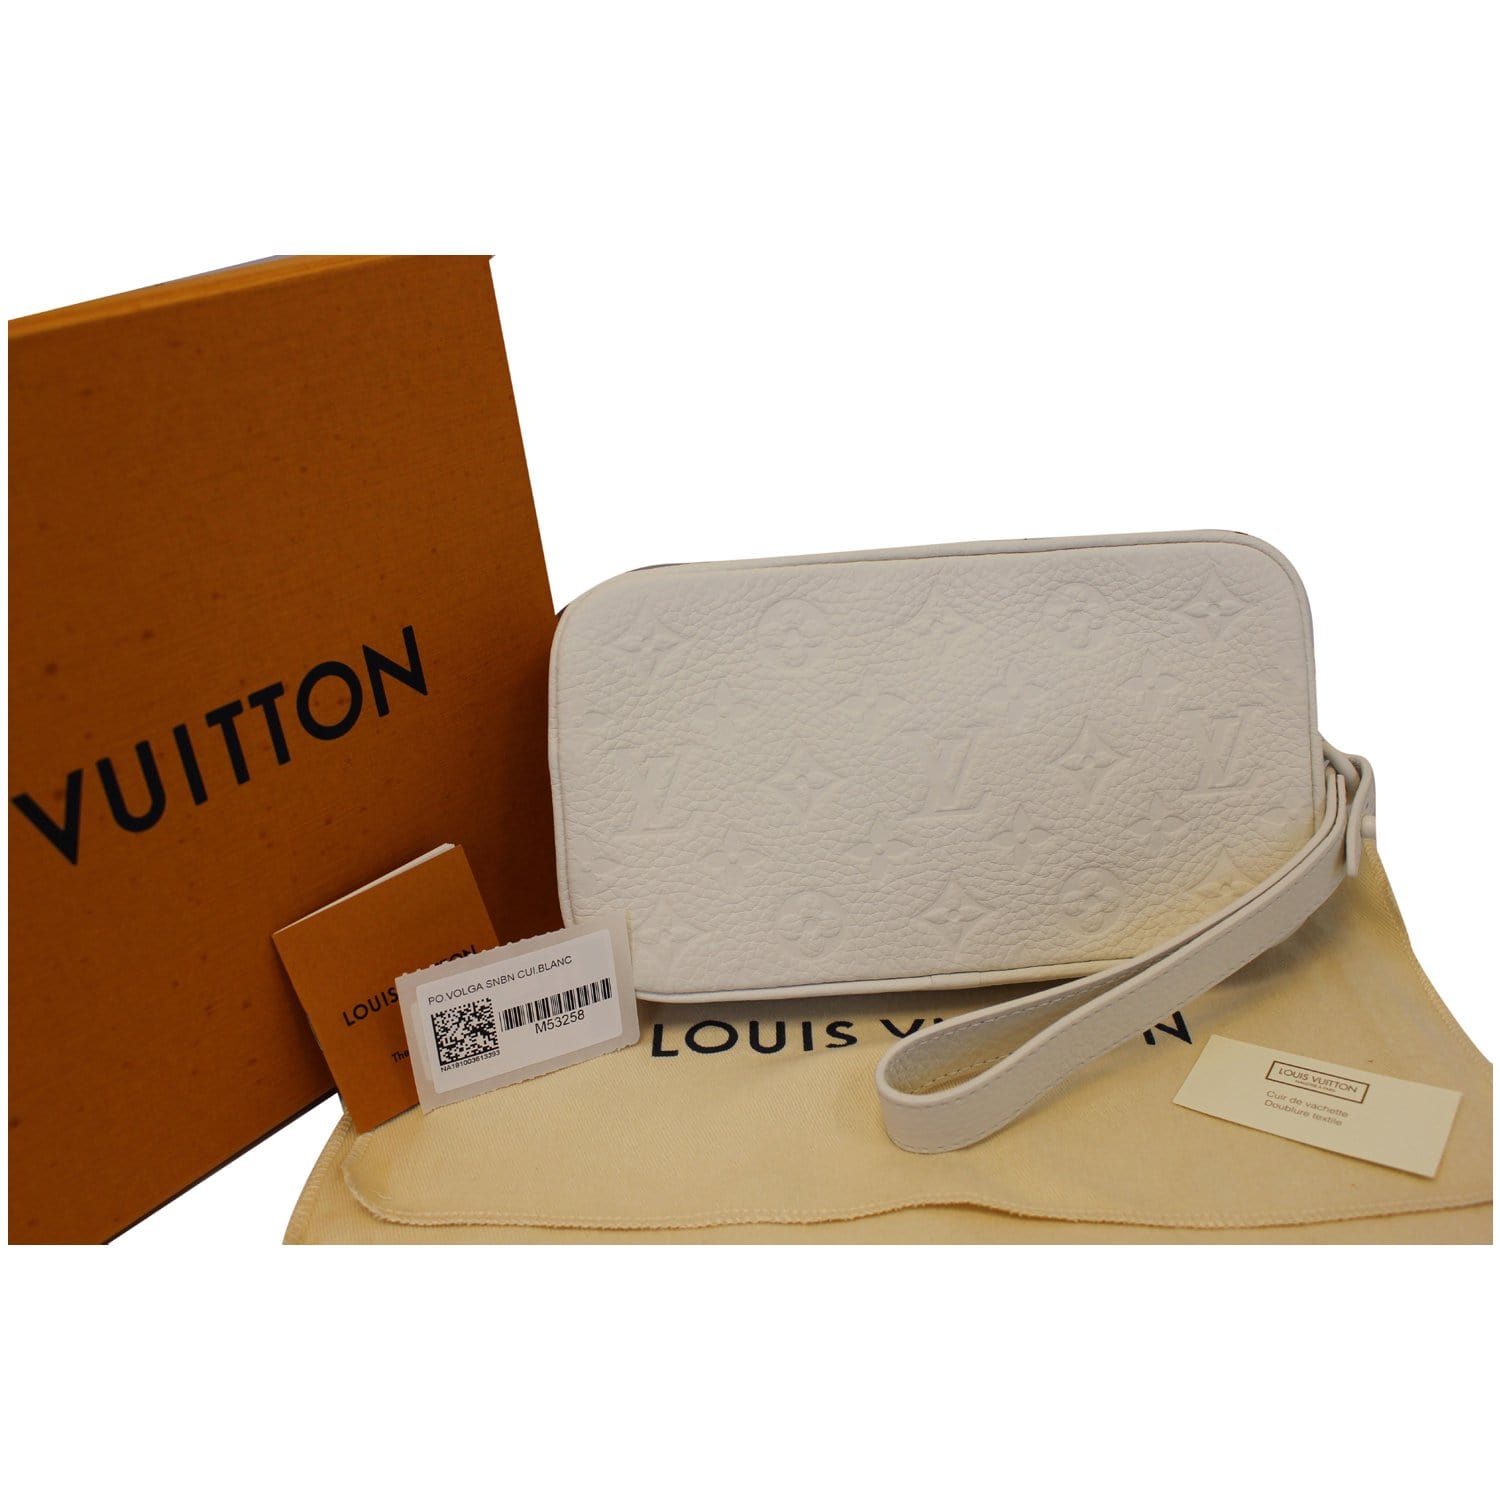 Pochette Volga - Luxury All Wallets and Small Leather Goods